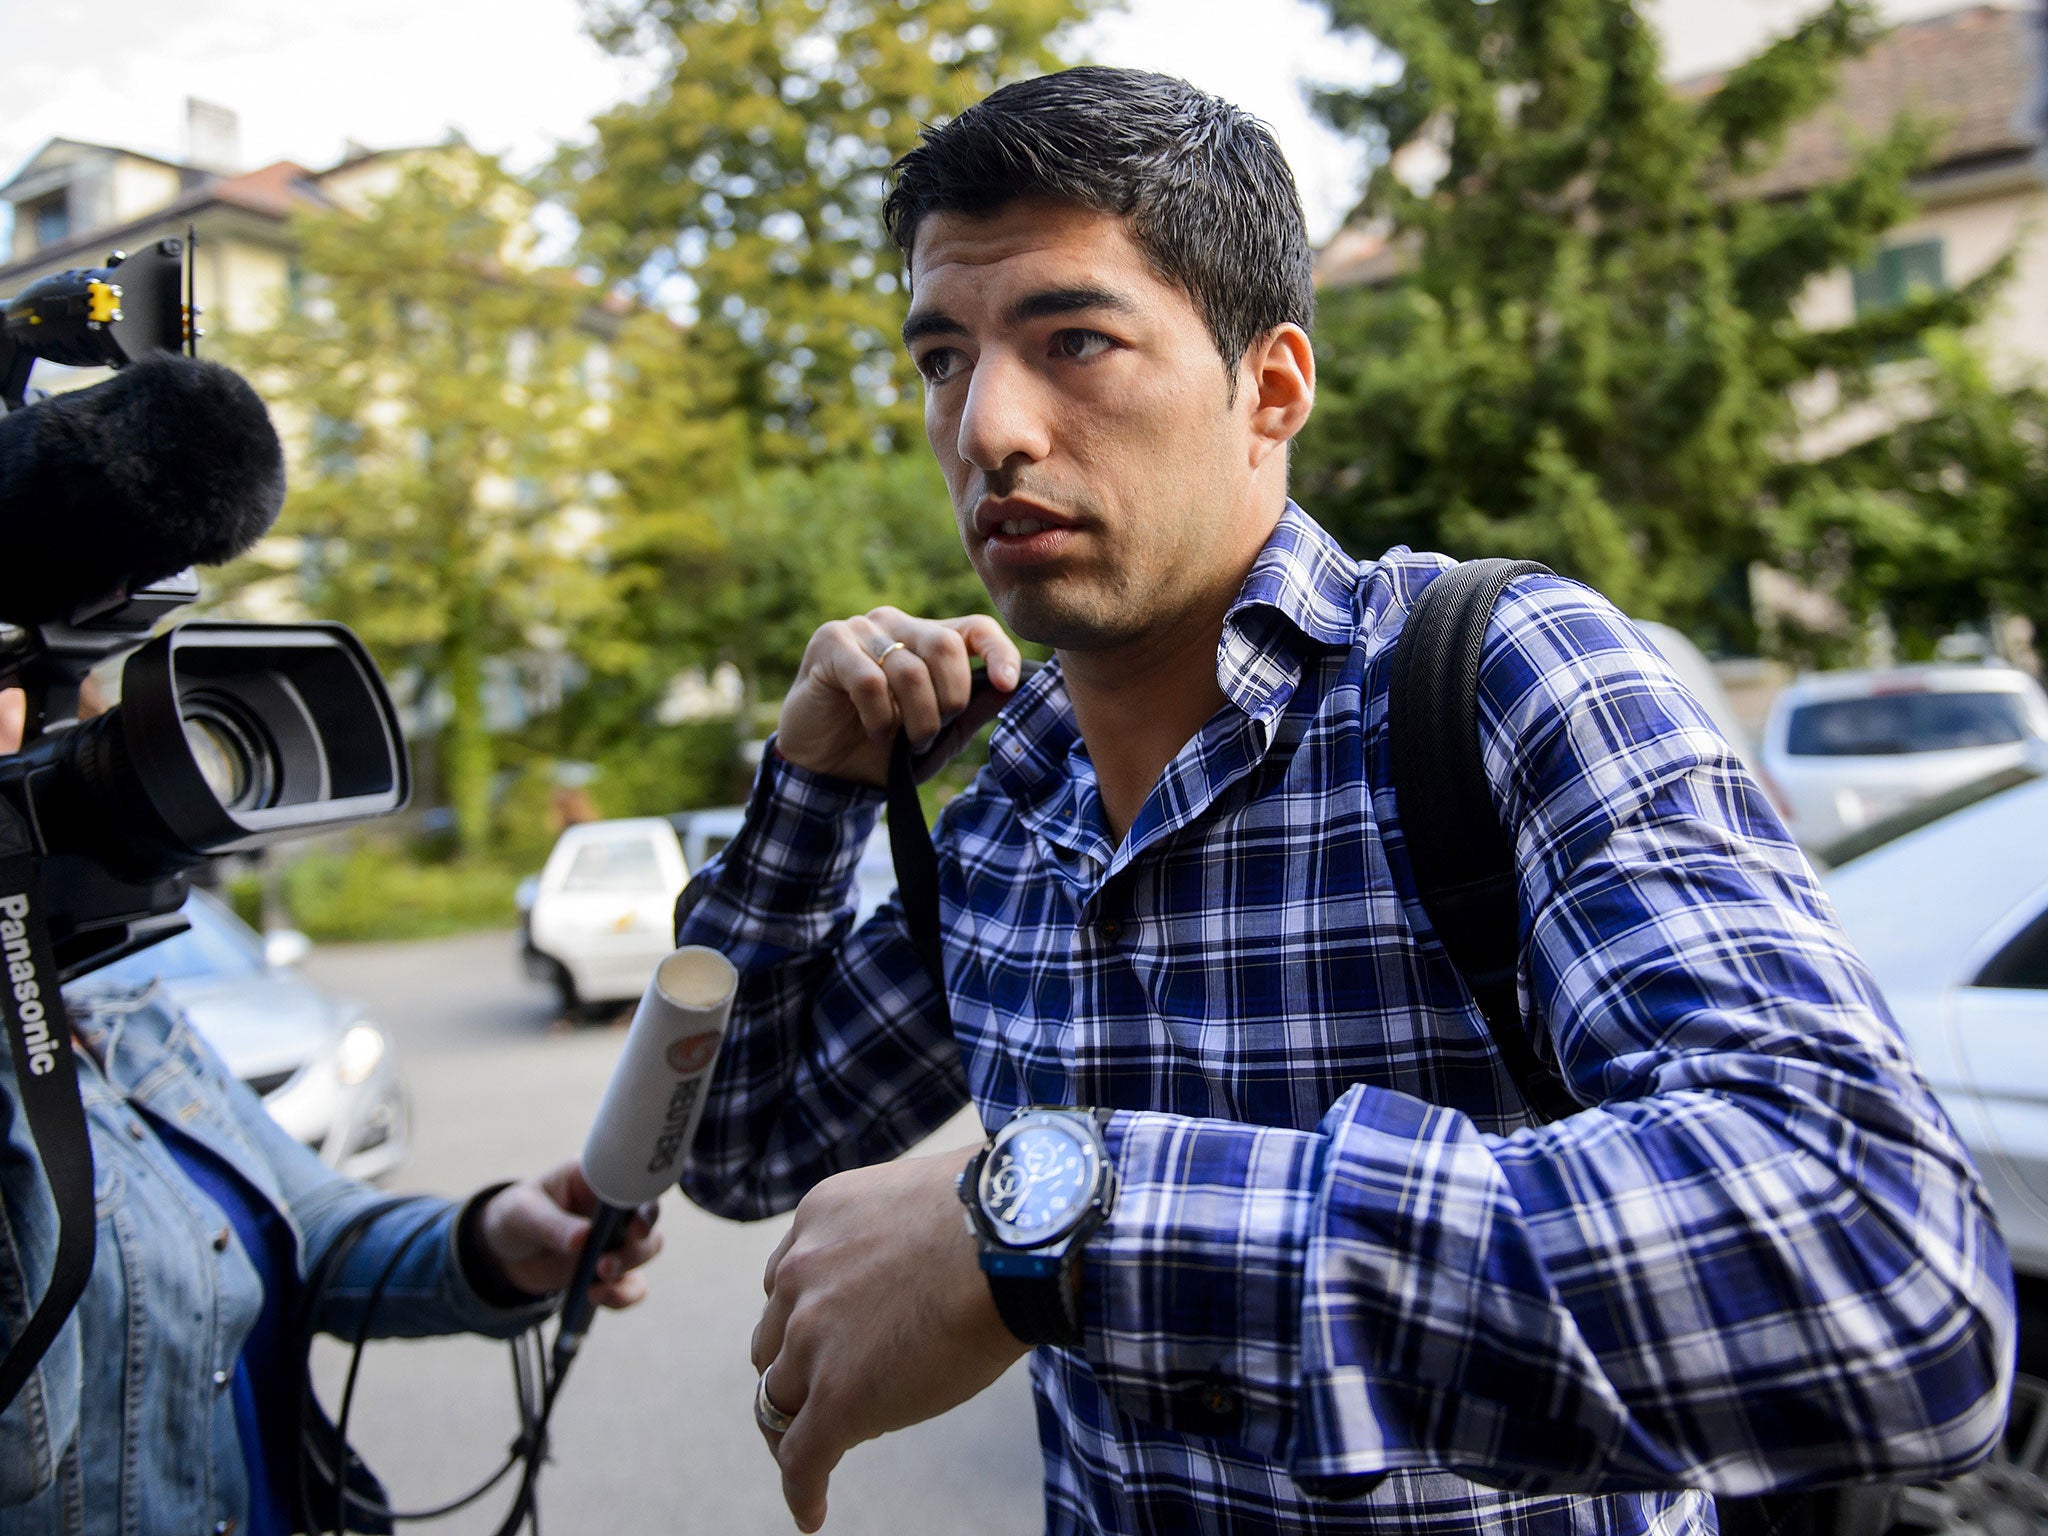 Luis Suarez will find out his fate next week after giving a statement to the Court of Arbitration for Sport